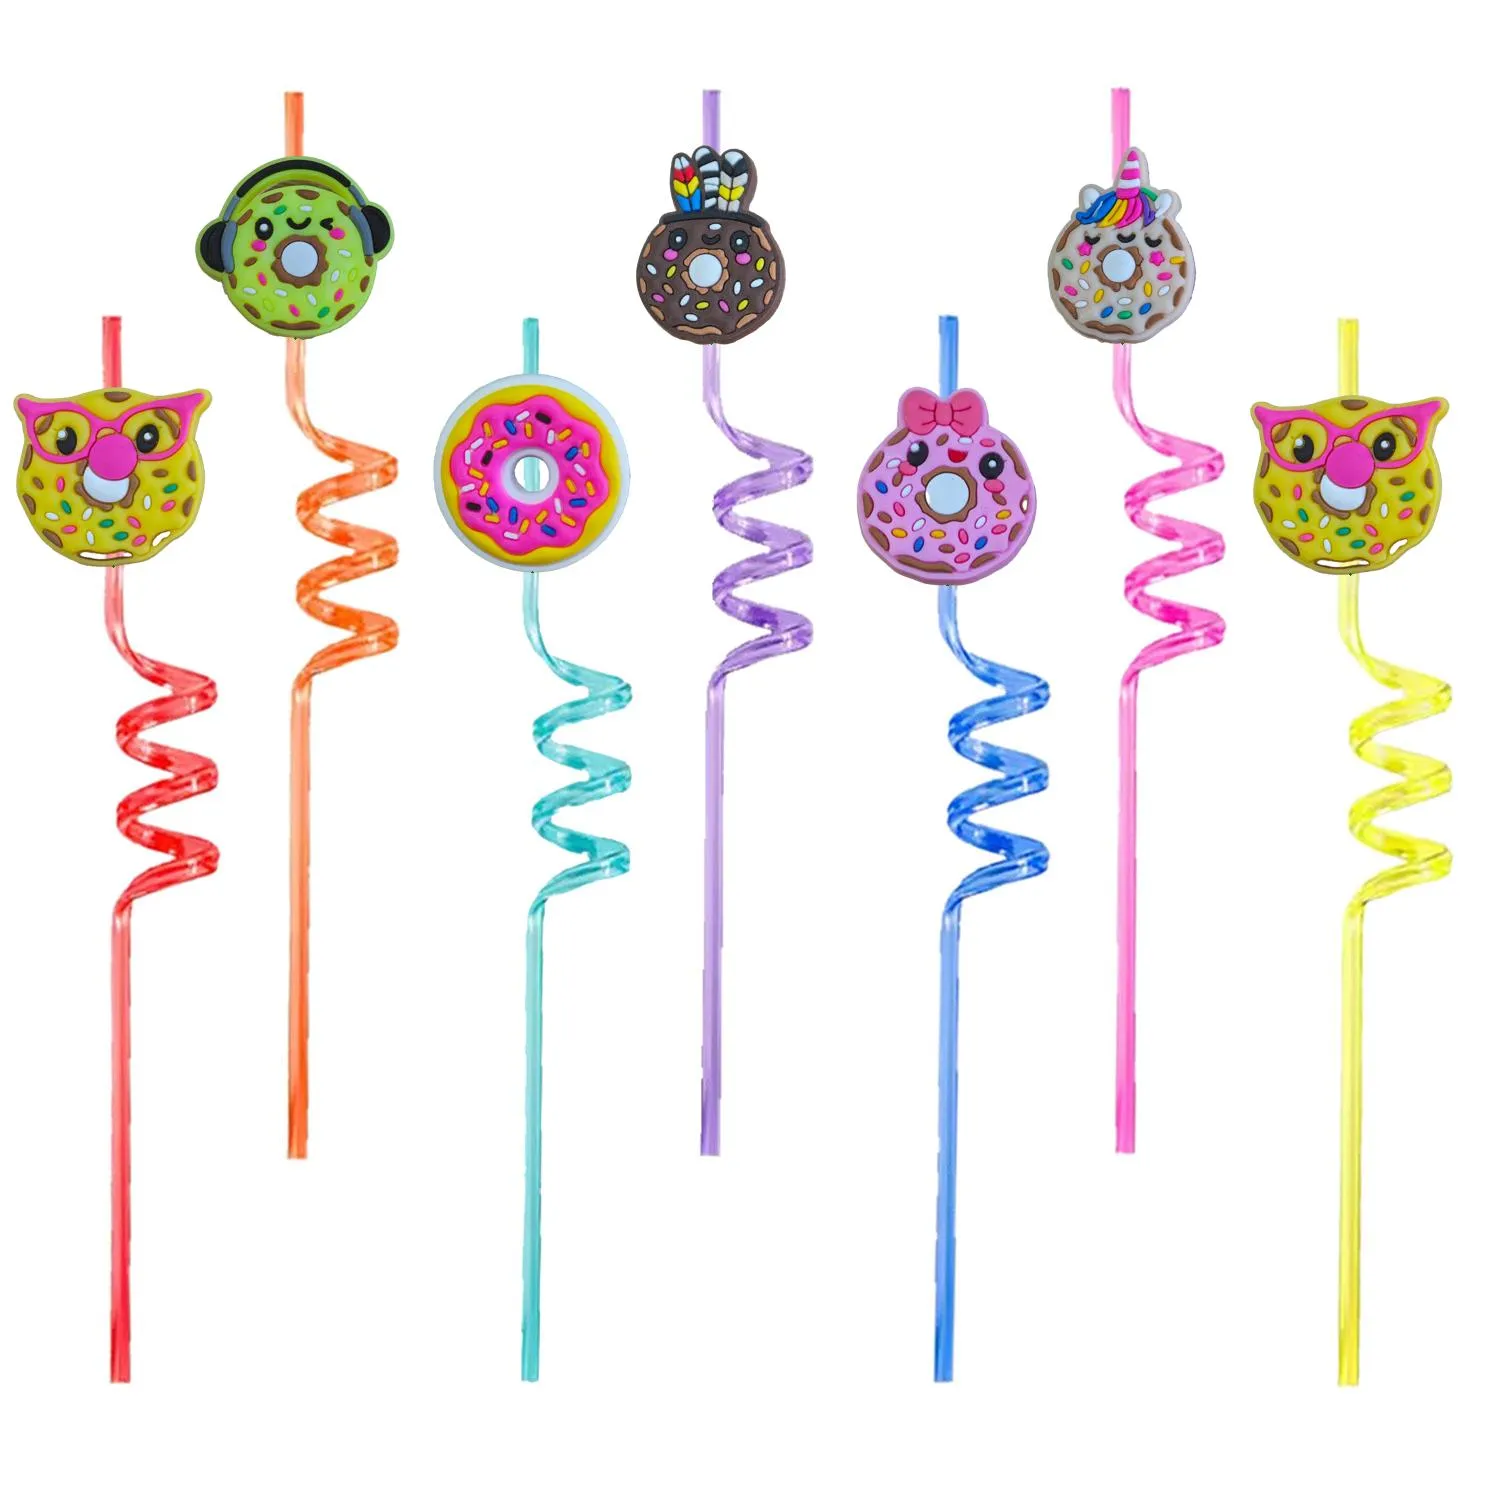 Boire STS CARTOONE Donuts Thèmes Goodie Crazy Goodie For Kids Party Summer Favors Christmas Fais